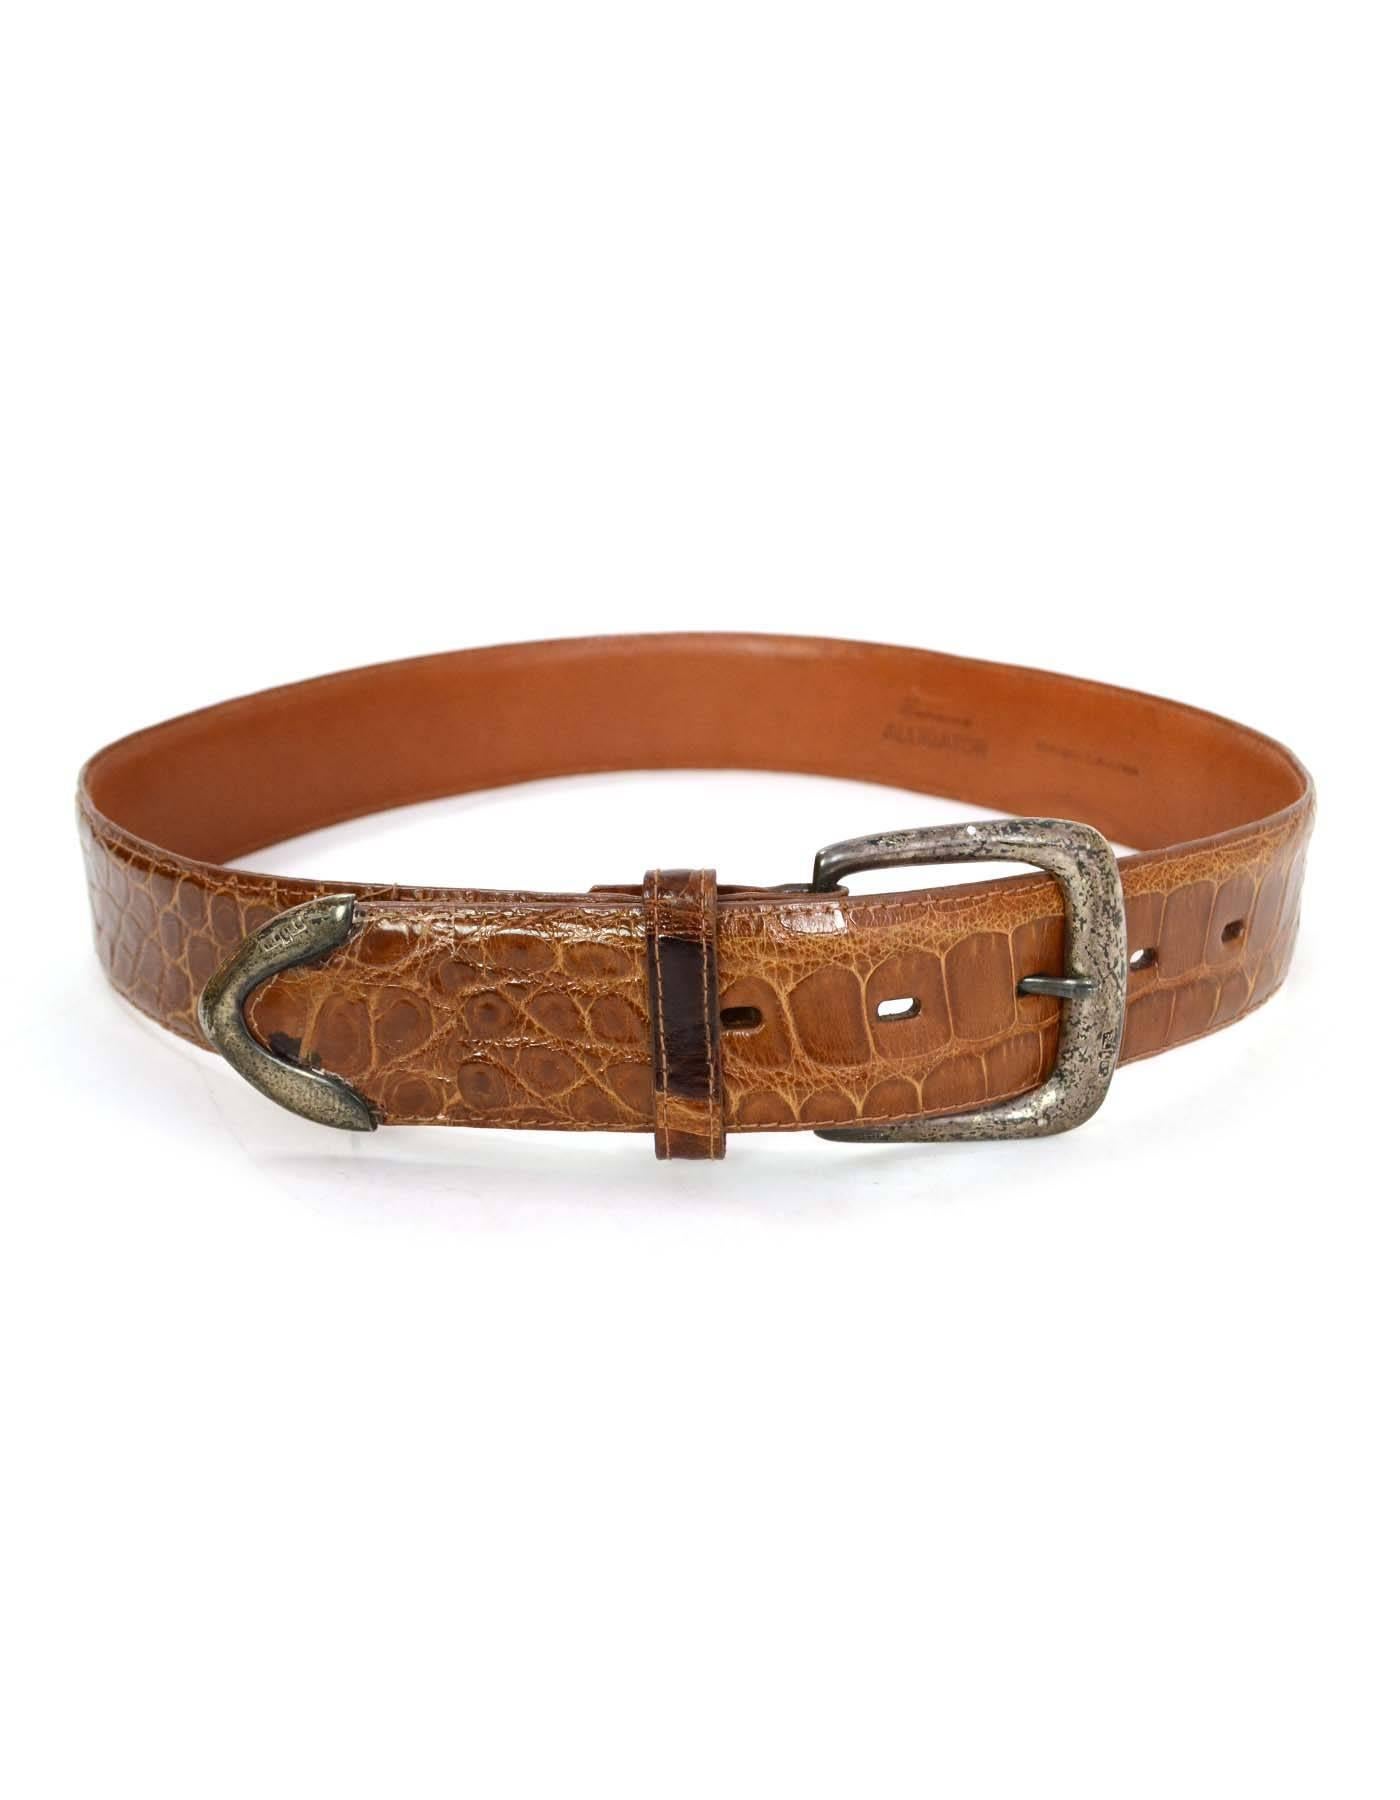 Ralph Lauren Brown Alligator Belt sz 28
Features distressed sterling silver buckle
Color: Brown
Hardware: Sterling silver
Materials: Alligator
Closure/Opening: Buckle and notch closure
Overall Condition: Excellent pre-owned condition with the